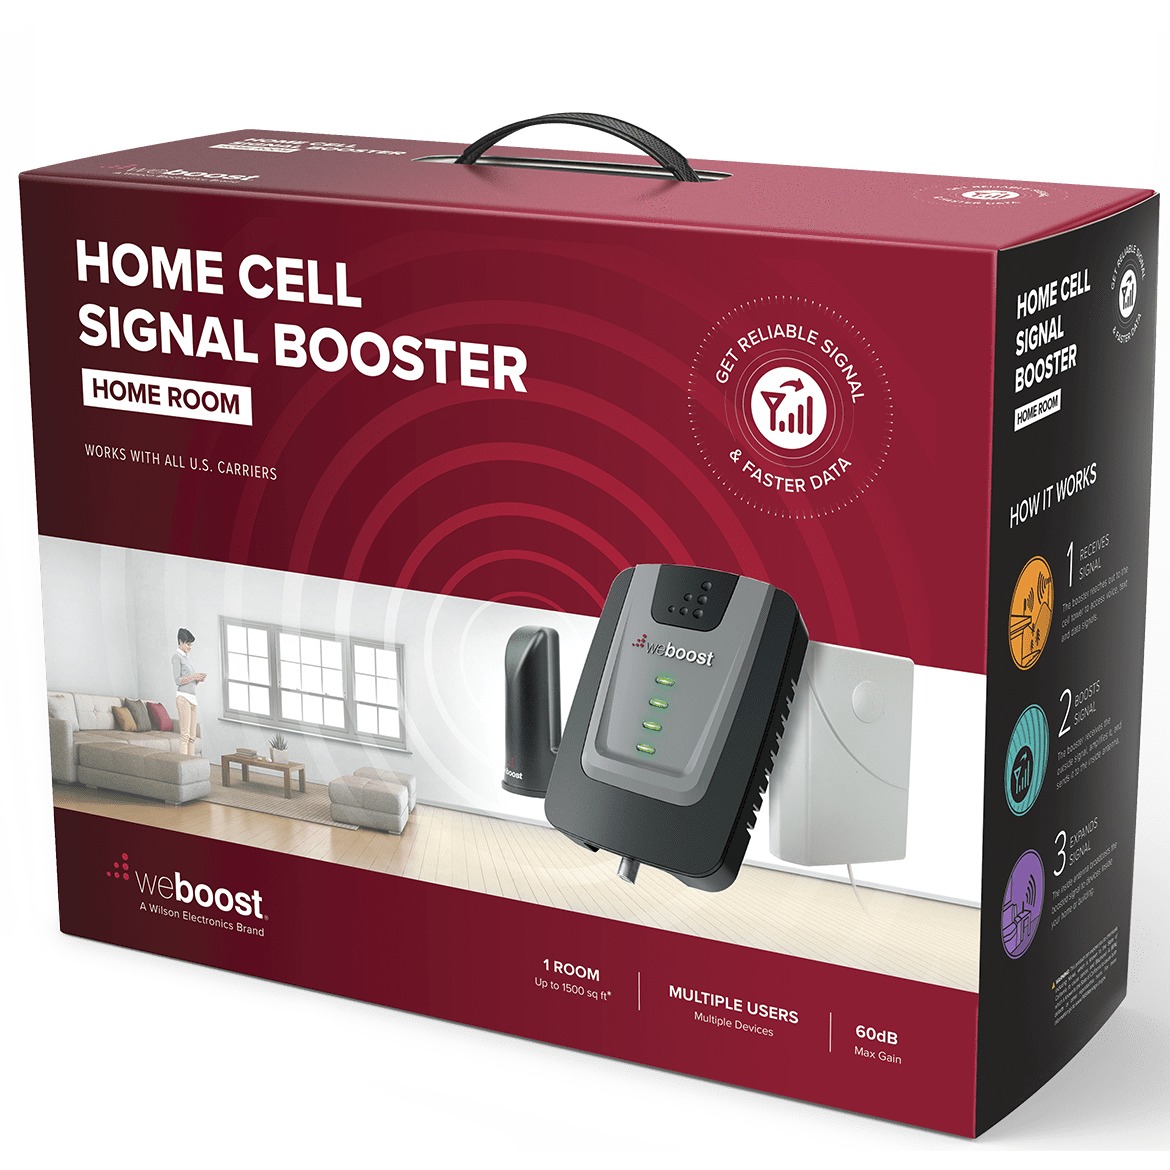 weBoost Home Room, Cell Phone Signal Booster Kit for 1 Room, Boosts 4G LTE & 5G for all U.S. Carriers, FCC Approved (Model 472120) - image 2 of 8